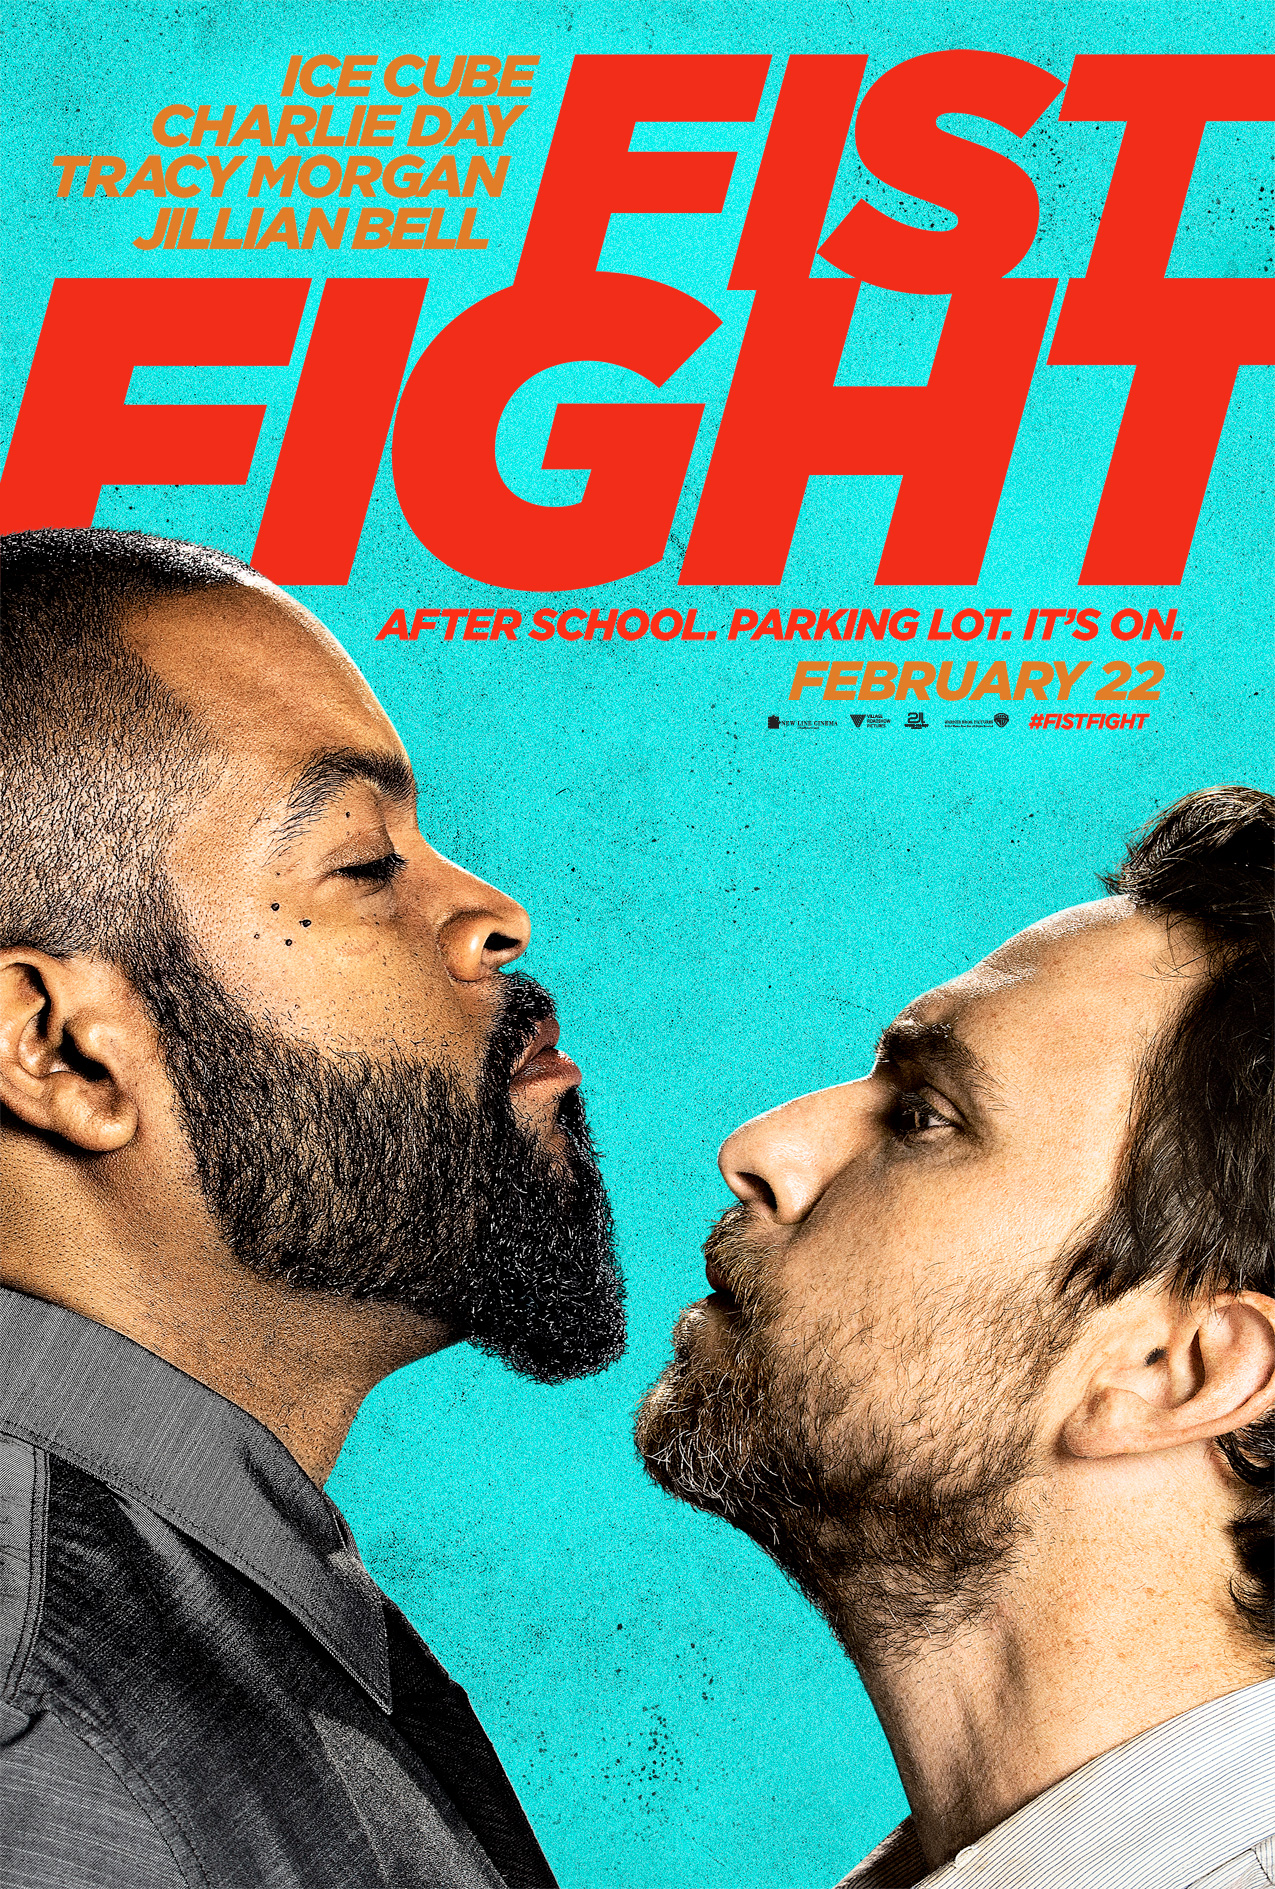 Ice Cube takes on Charlie Day in “FIST FIGHT” teaser trailer